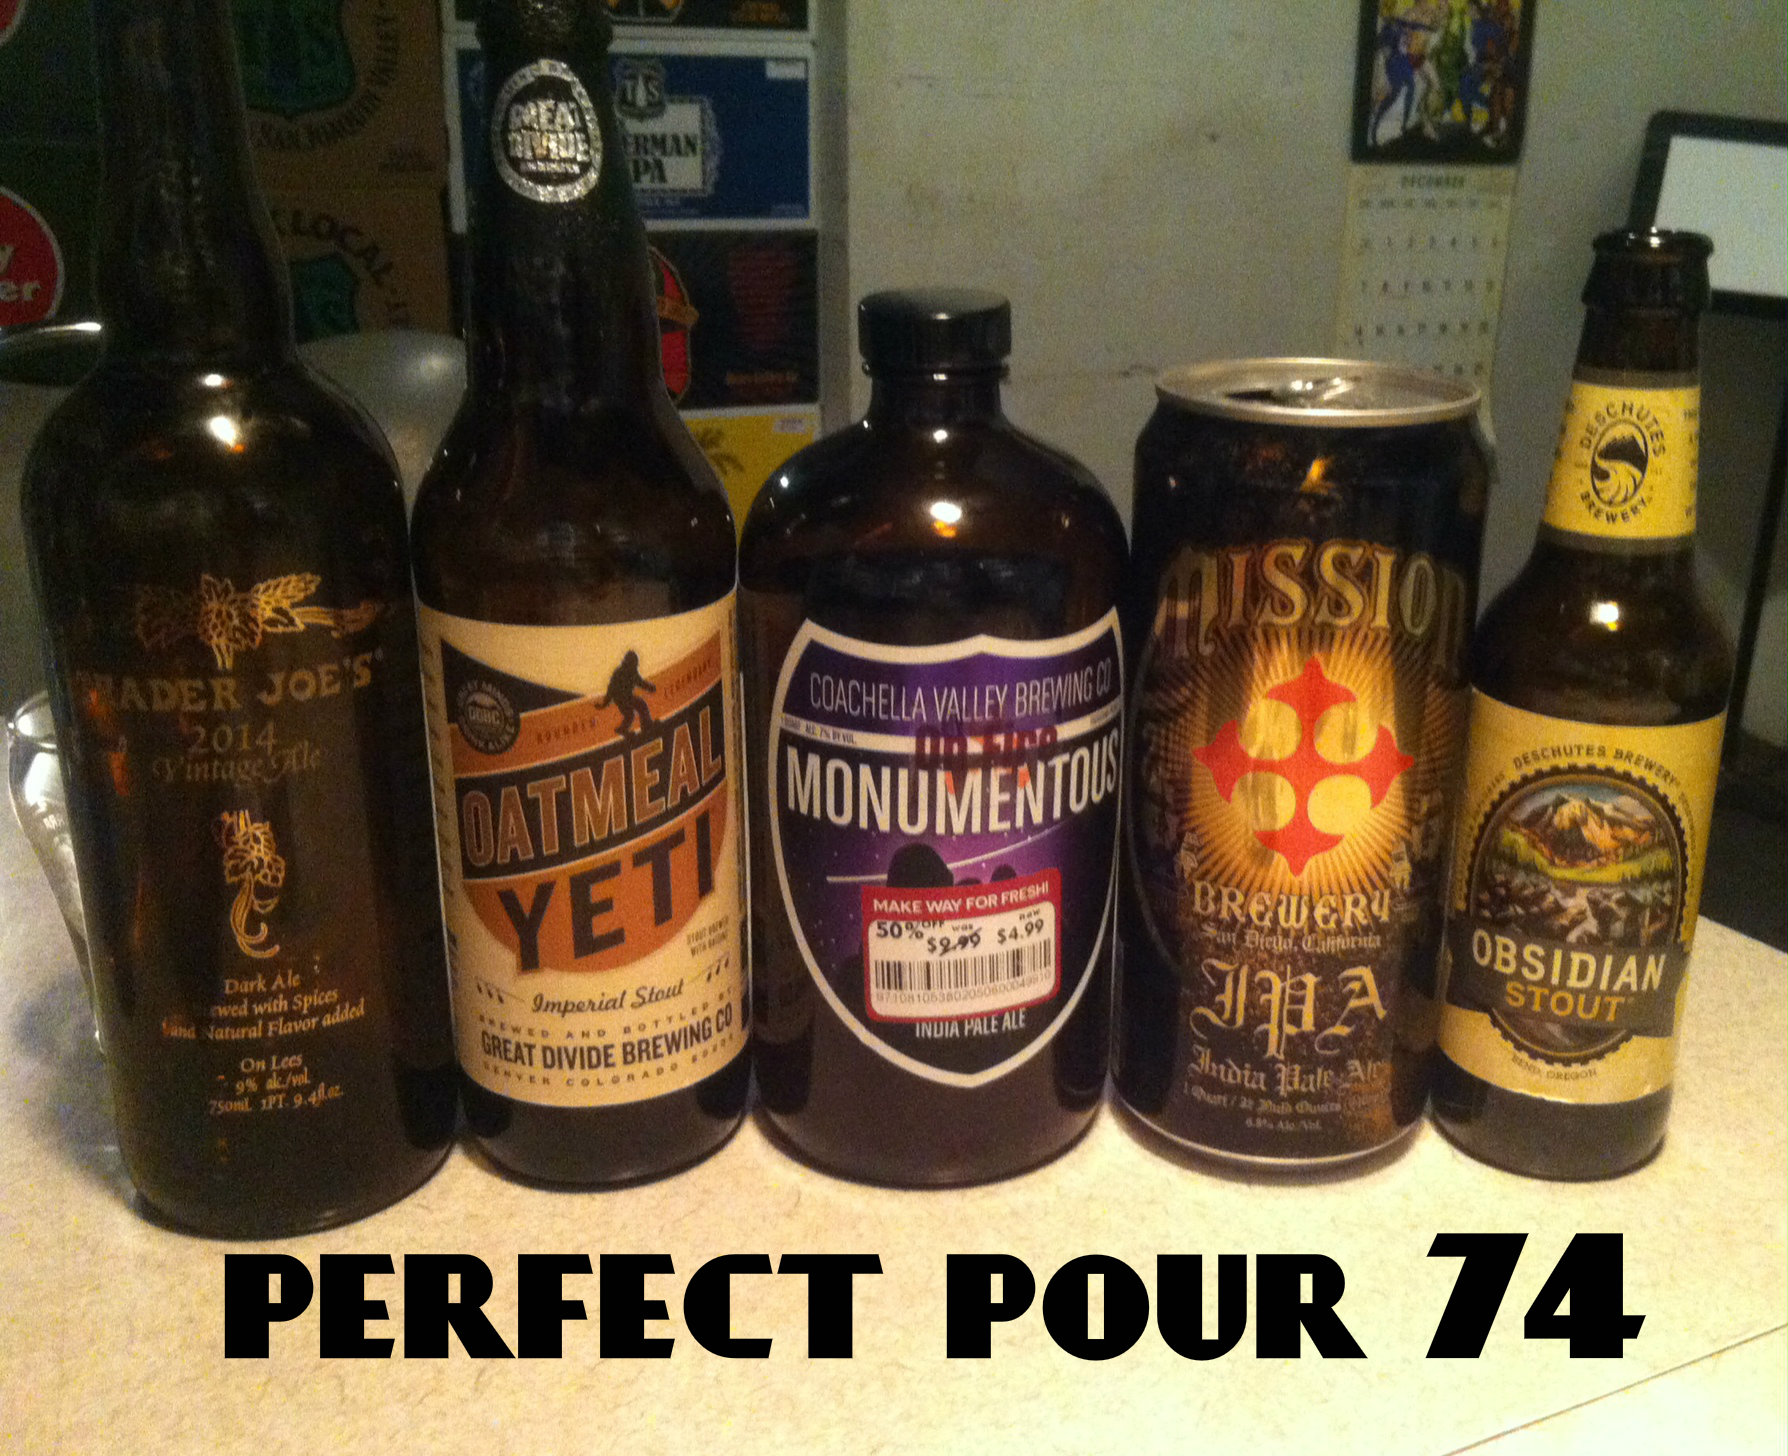 Shower Beers and Don't Be 'Naked Guy' At Your Next Bottle Share: The Perfect Pour #74